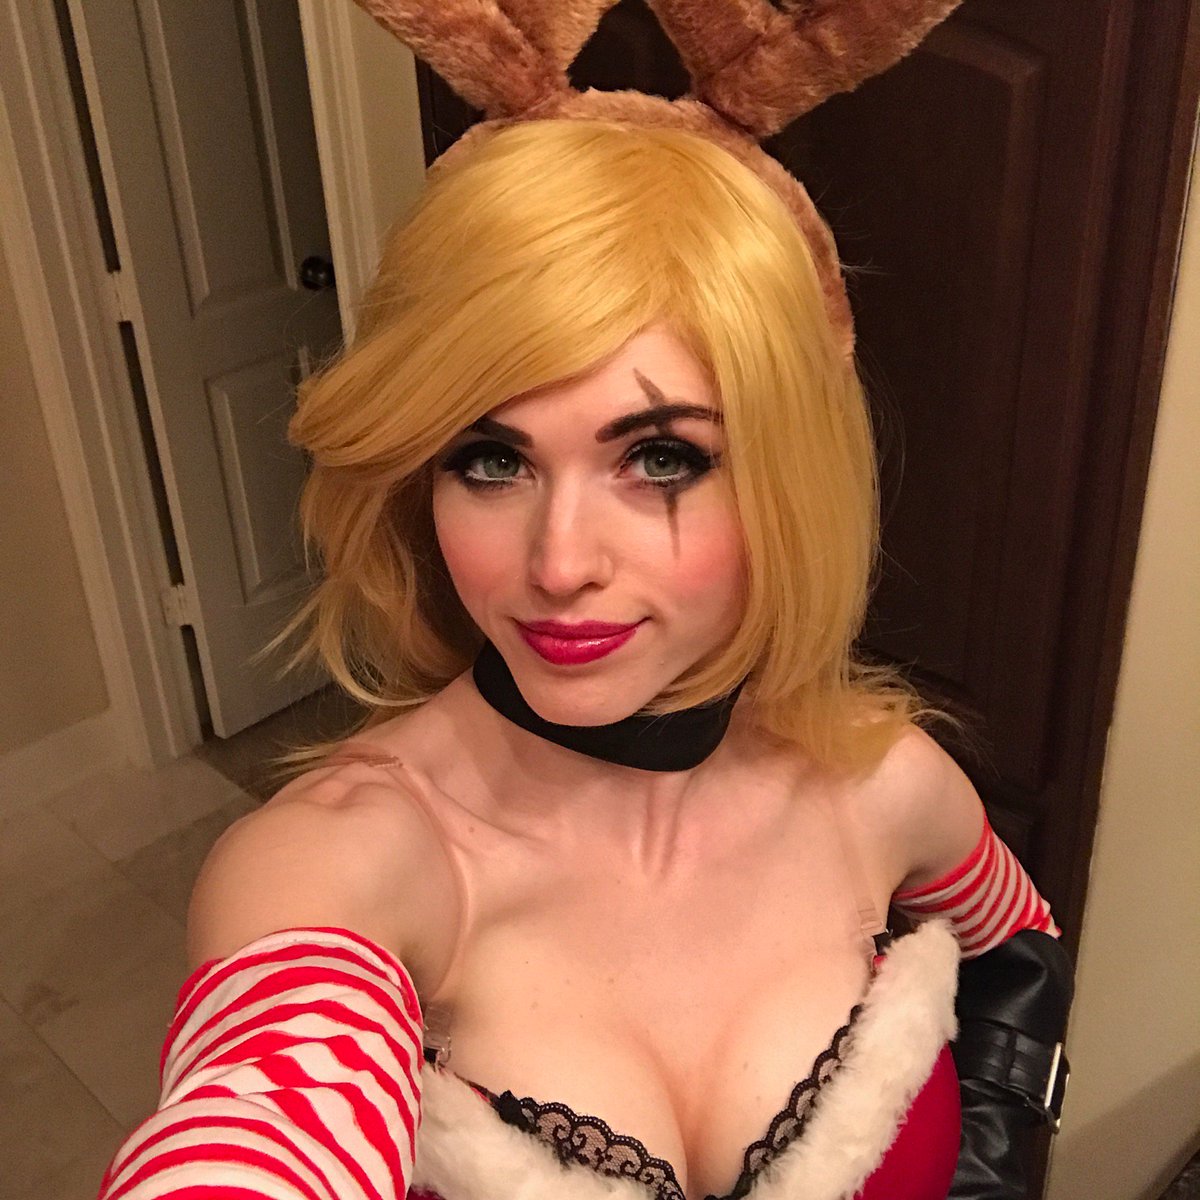 Amouranth 😈 Patreon On Twitter Live Twitch Https//t.